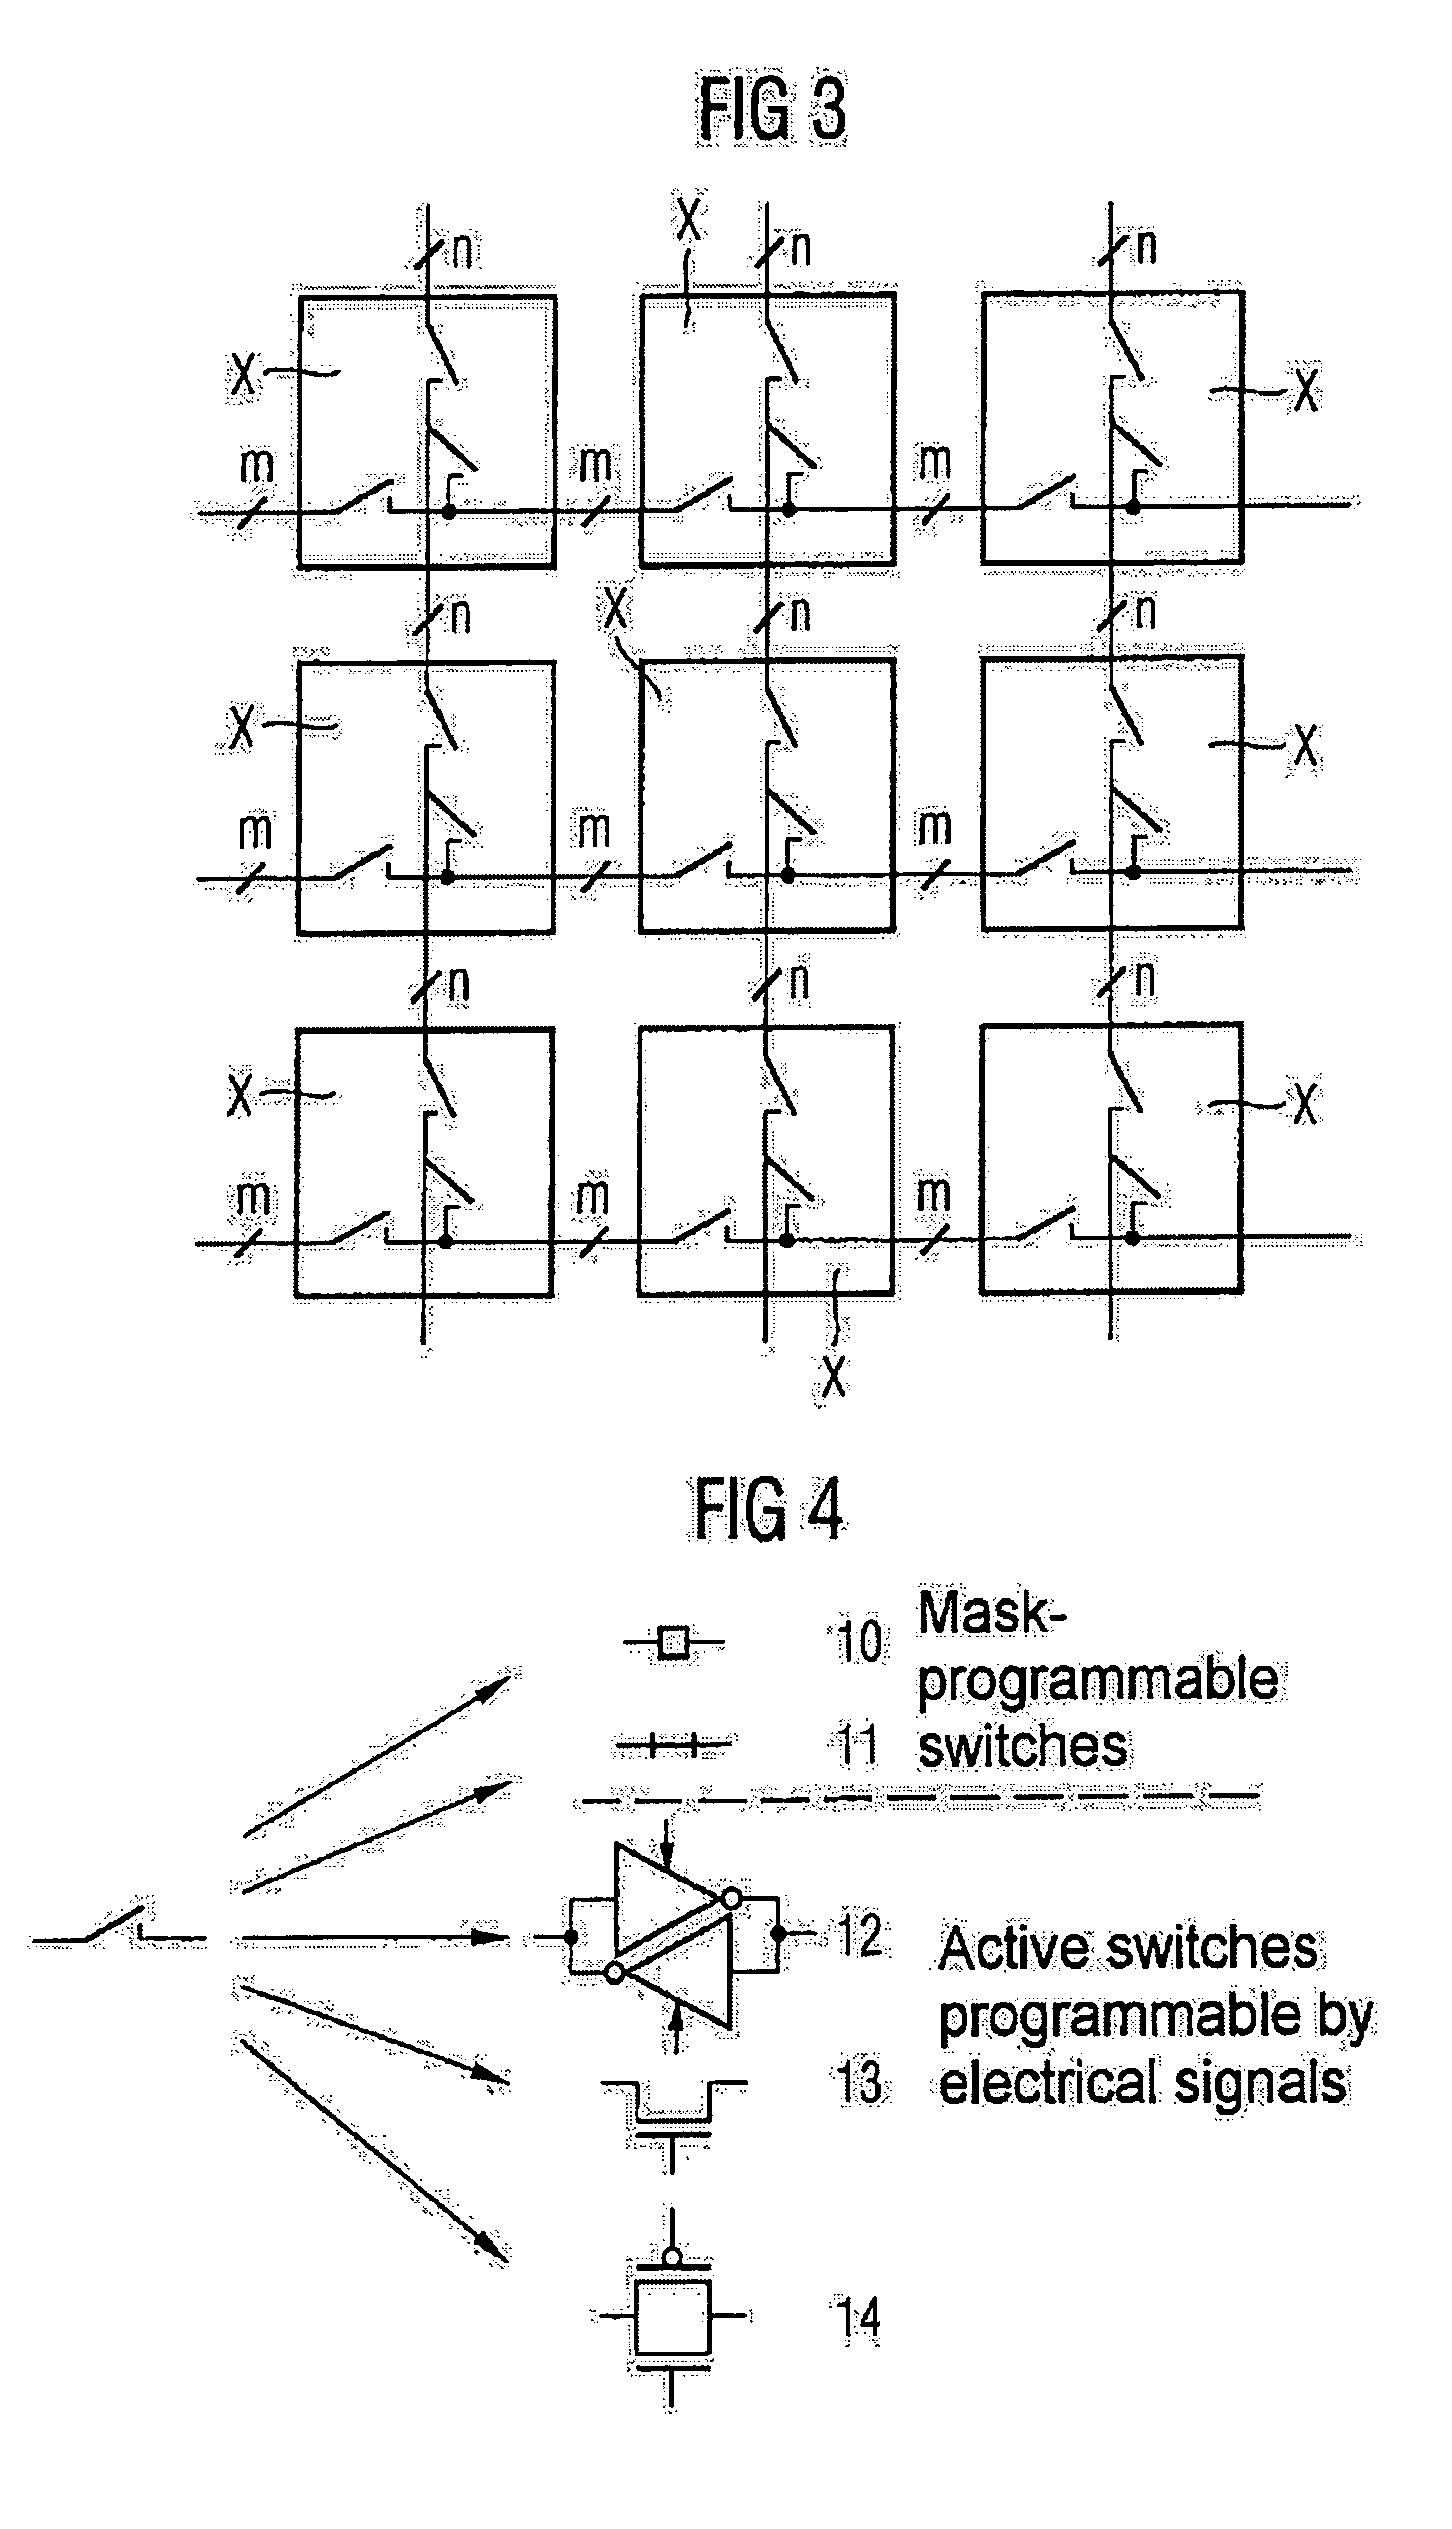 Architecture of function blocks and wirings in a structured ASIC and configurable driver cell of a logic cell zone